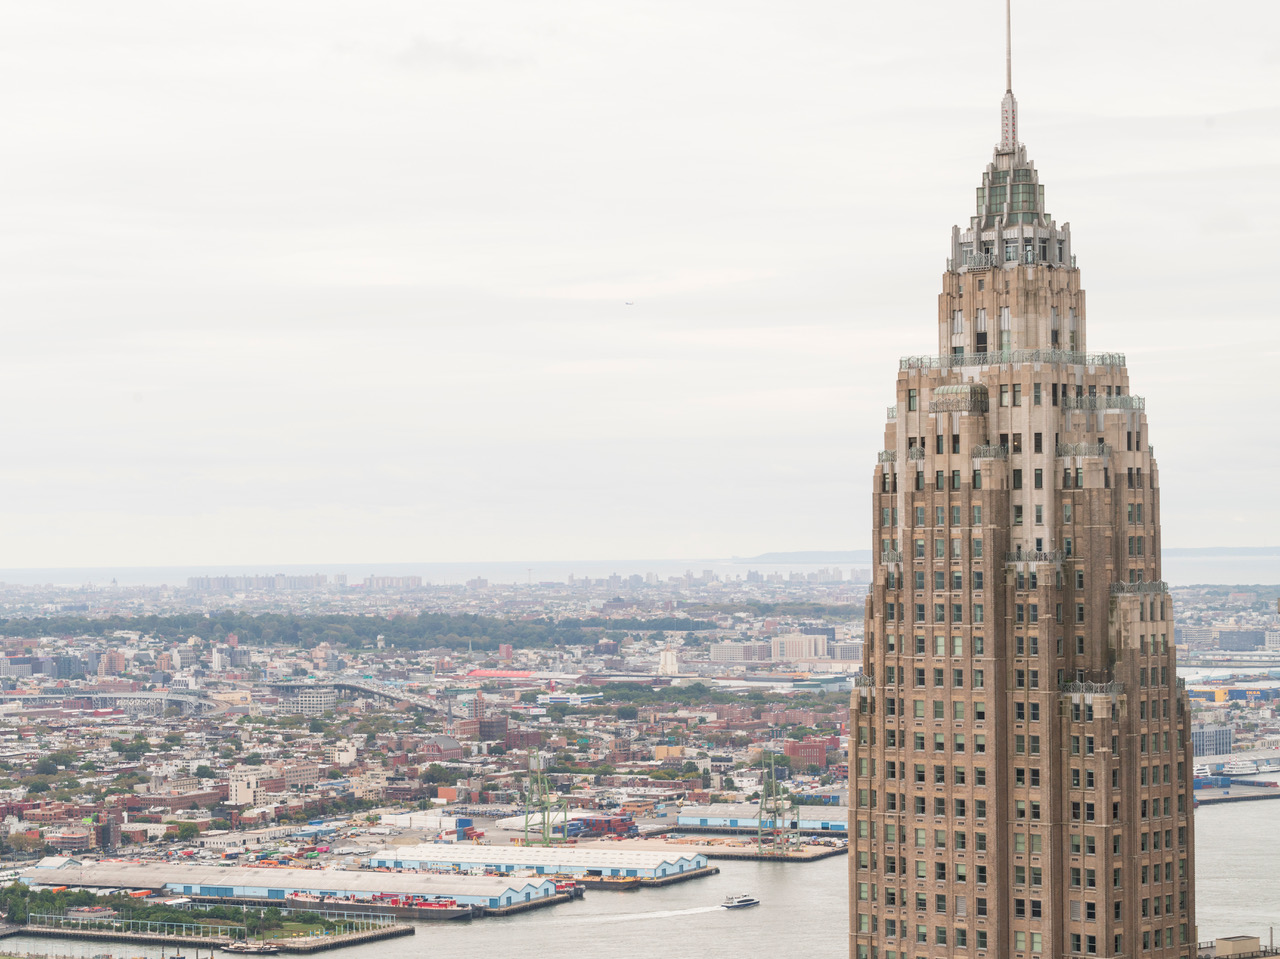 A landscape photo of the top spire of a building against the backdrop of New York City